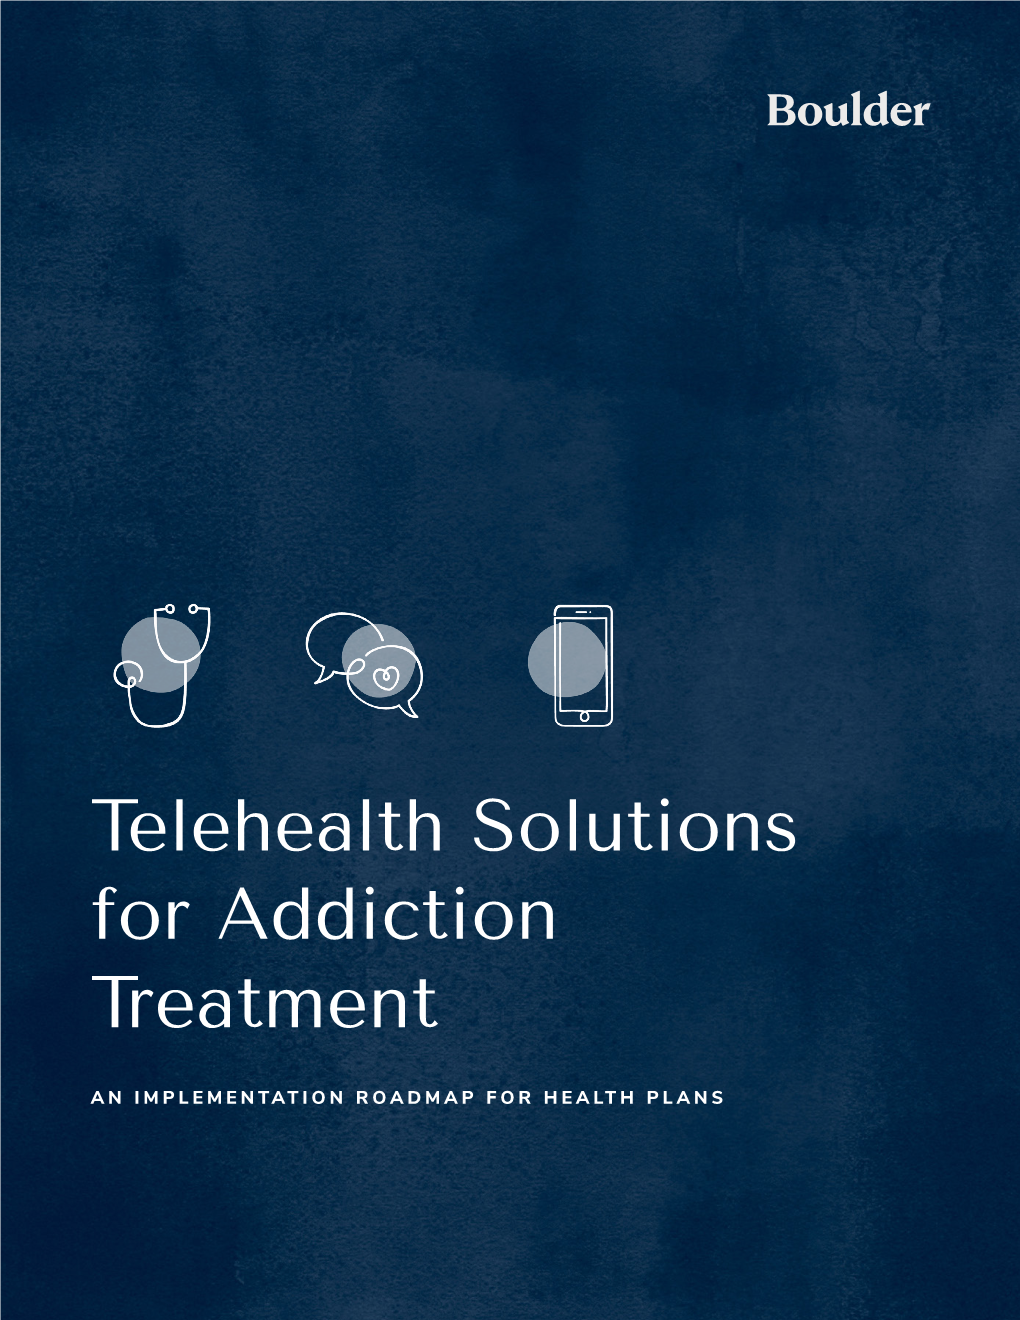 Telehealth Solutions for Addiction Treatment 1 an IMPLEMENTATION ROADMAP for HEALTH PLANS